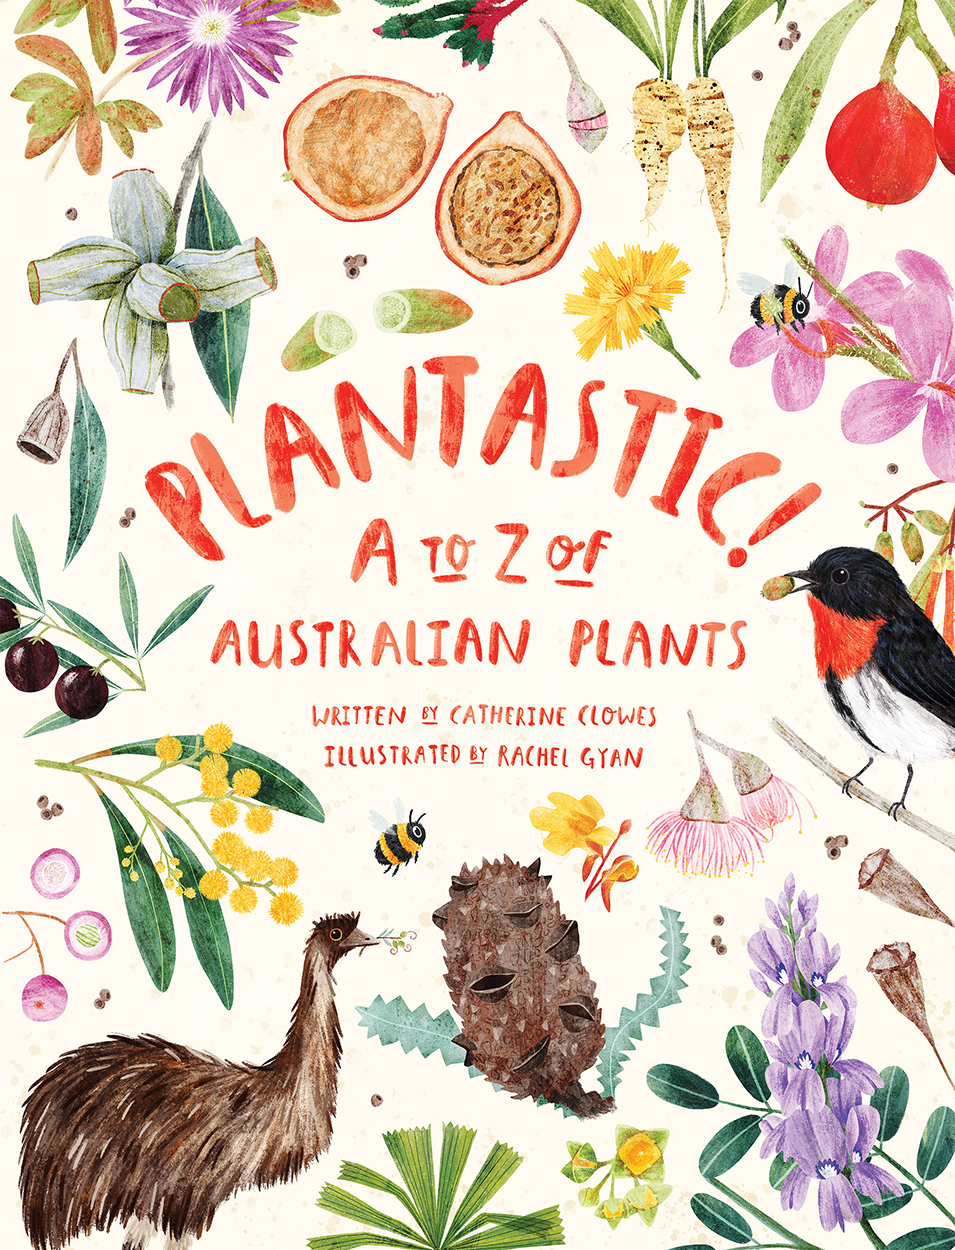 Cover of Plantastic! featuring illustrations of various Australian plants, flowers and animals surrounding the book title.